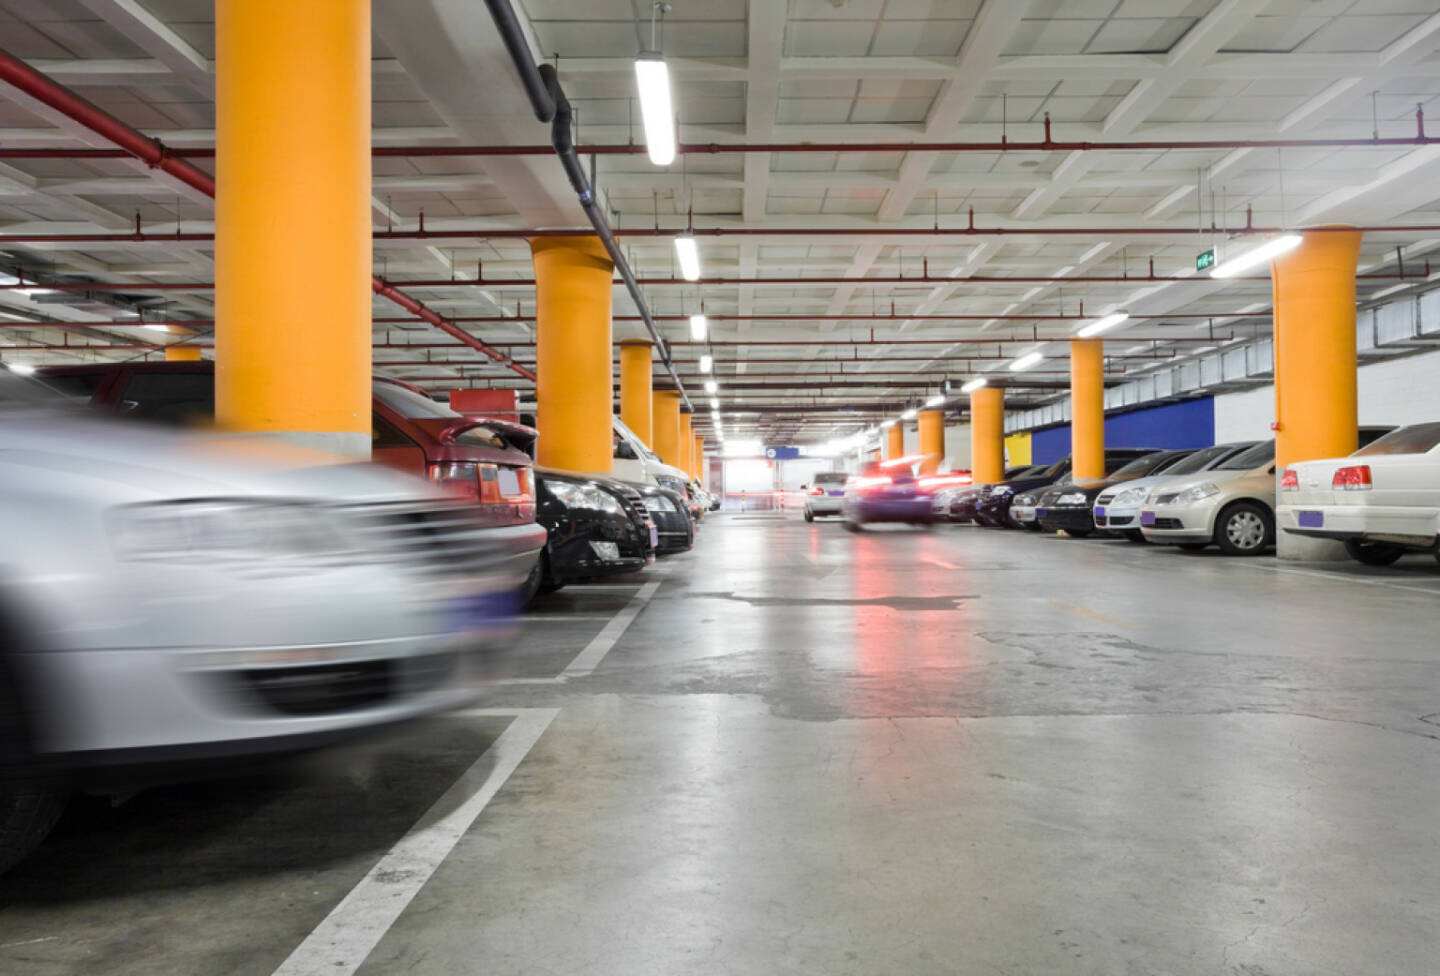 Parkhaus, Parkgarage, Garage, parken, Auto, http://www.shutterstock.com/de/pic-77849902/stock-photo-the-shined-underground-garage-with-the-moving-cars-and-parked-cars.html 